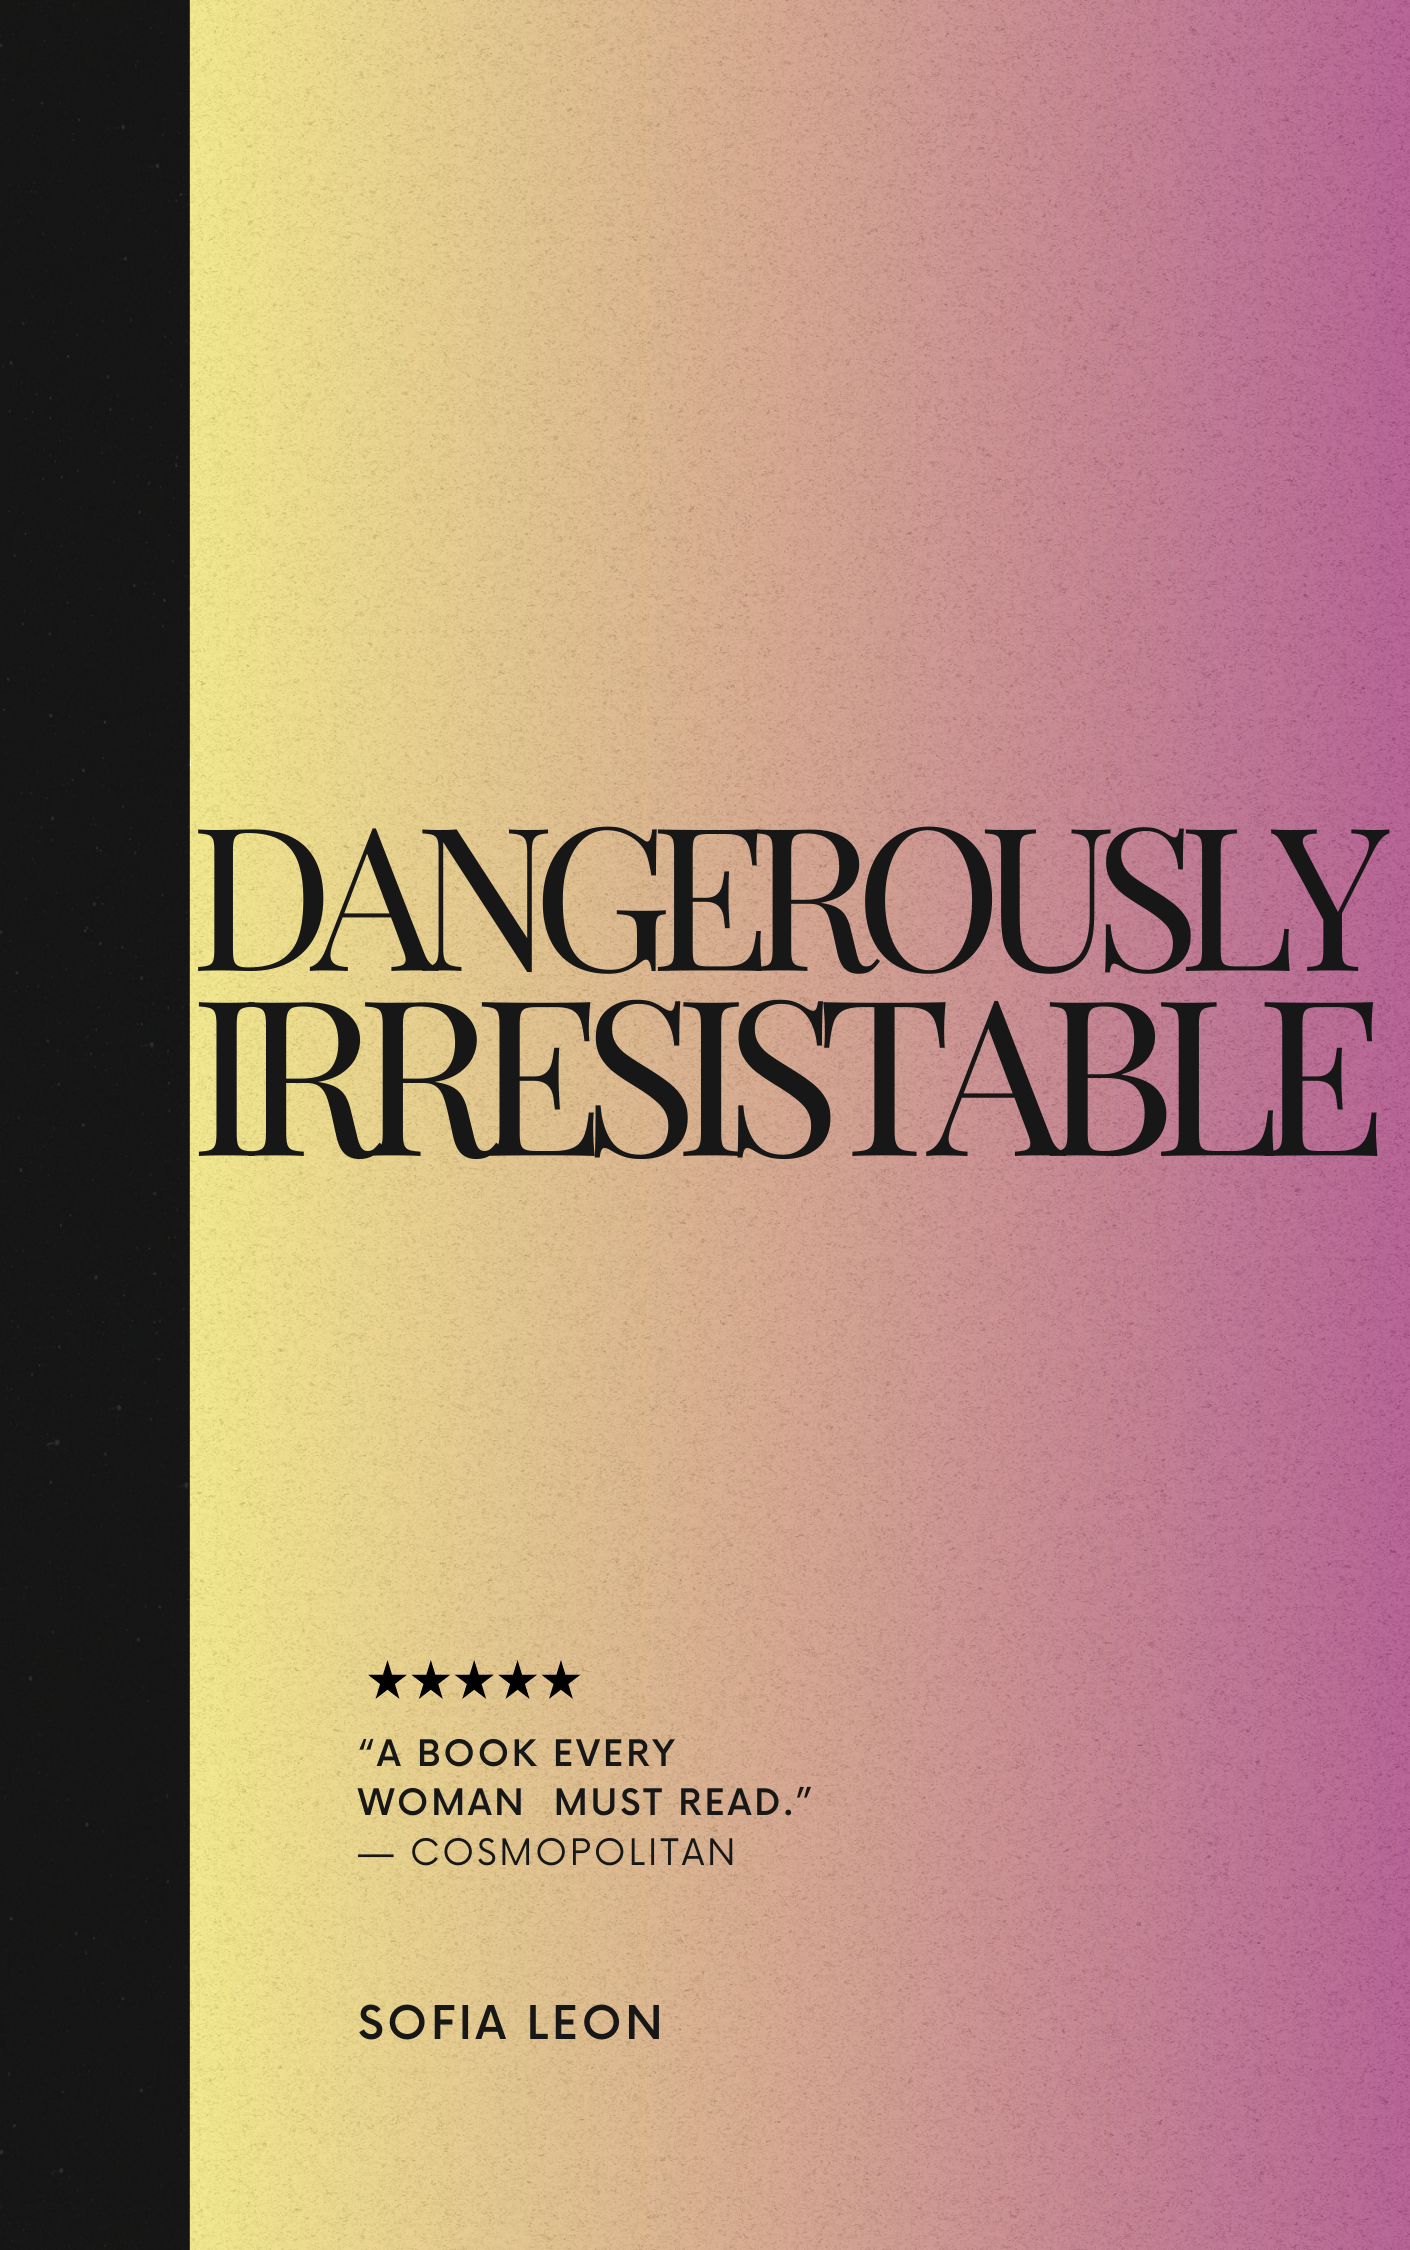 Dangerously Irresistible: Deluxe Edition